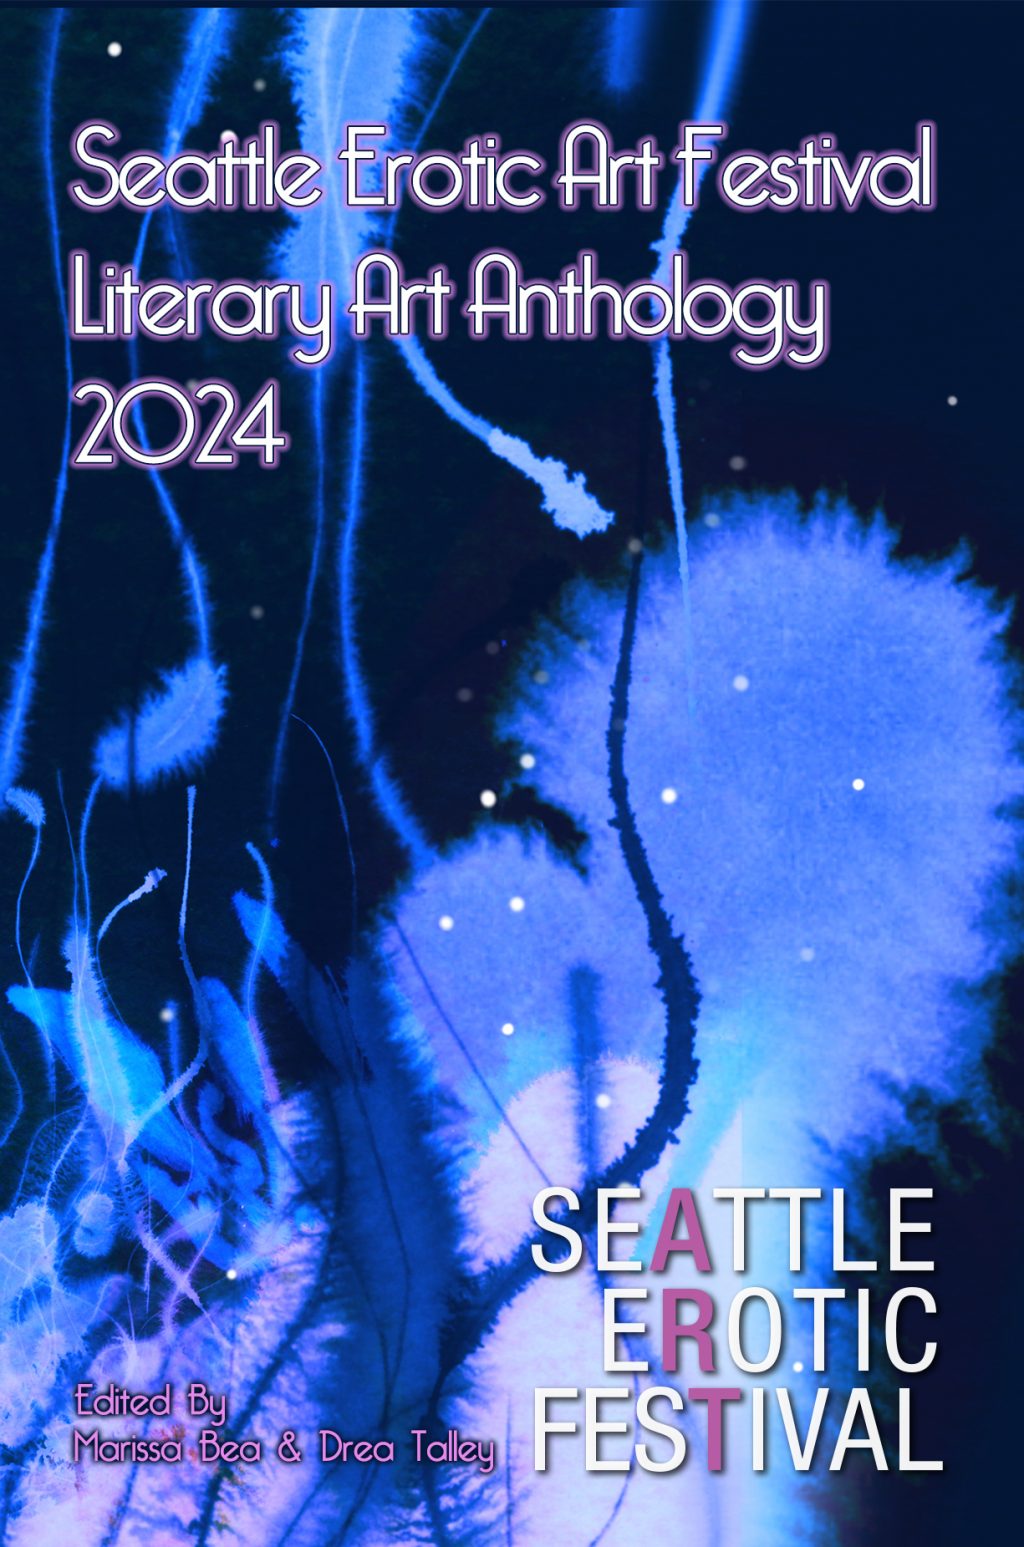 SEAF 2024 Award Winners: the front cover of the Seattle Erotic Art Festival Literary Art Anthology for 2024. Edited by Marissa Bea and Drea Talley.